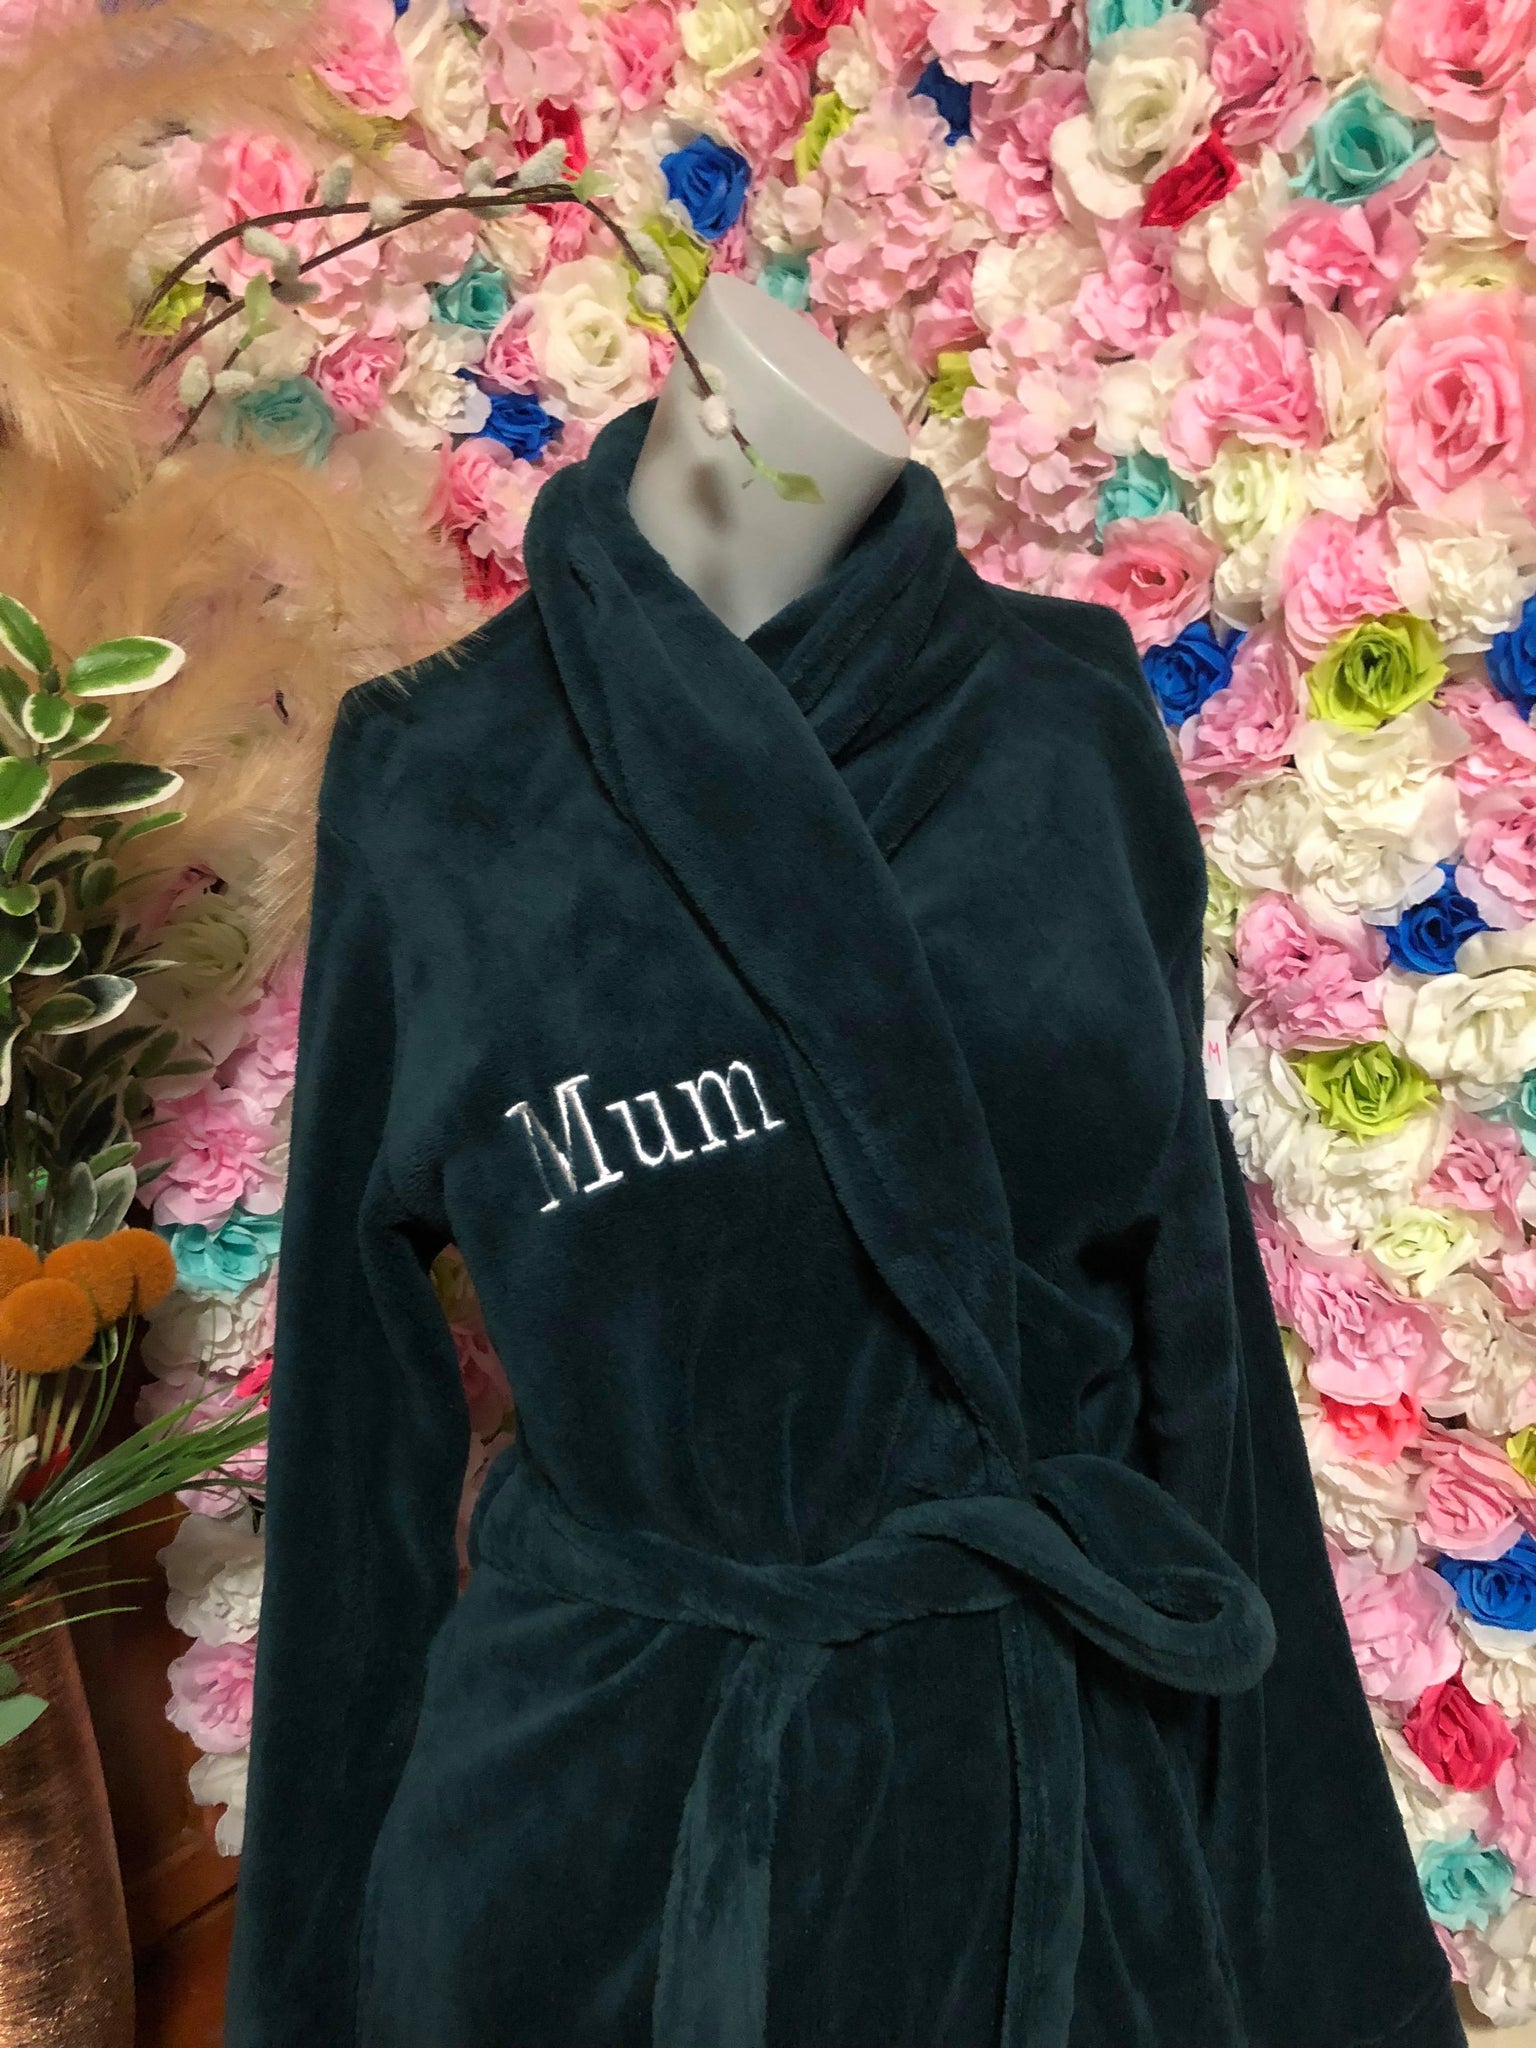 Shop for Size 26 | Dressing Gowns | Nightwear | Womens | online at Freemans